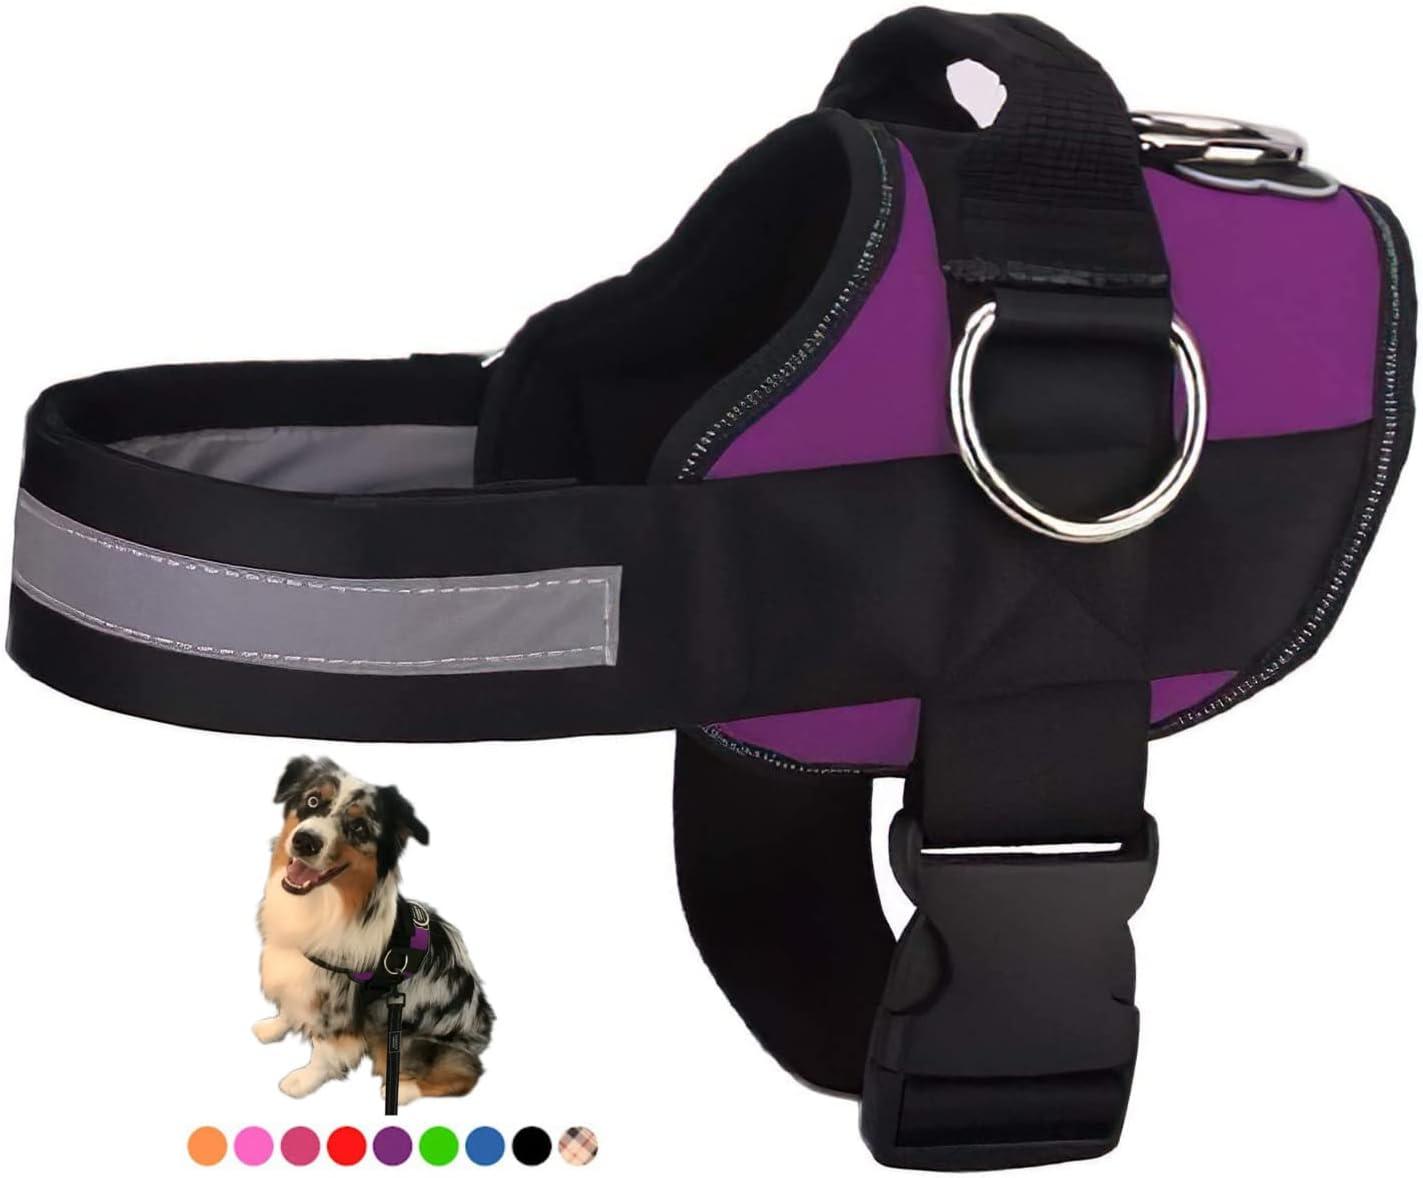 Joyride Harness for Small Dogs